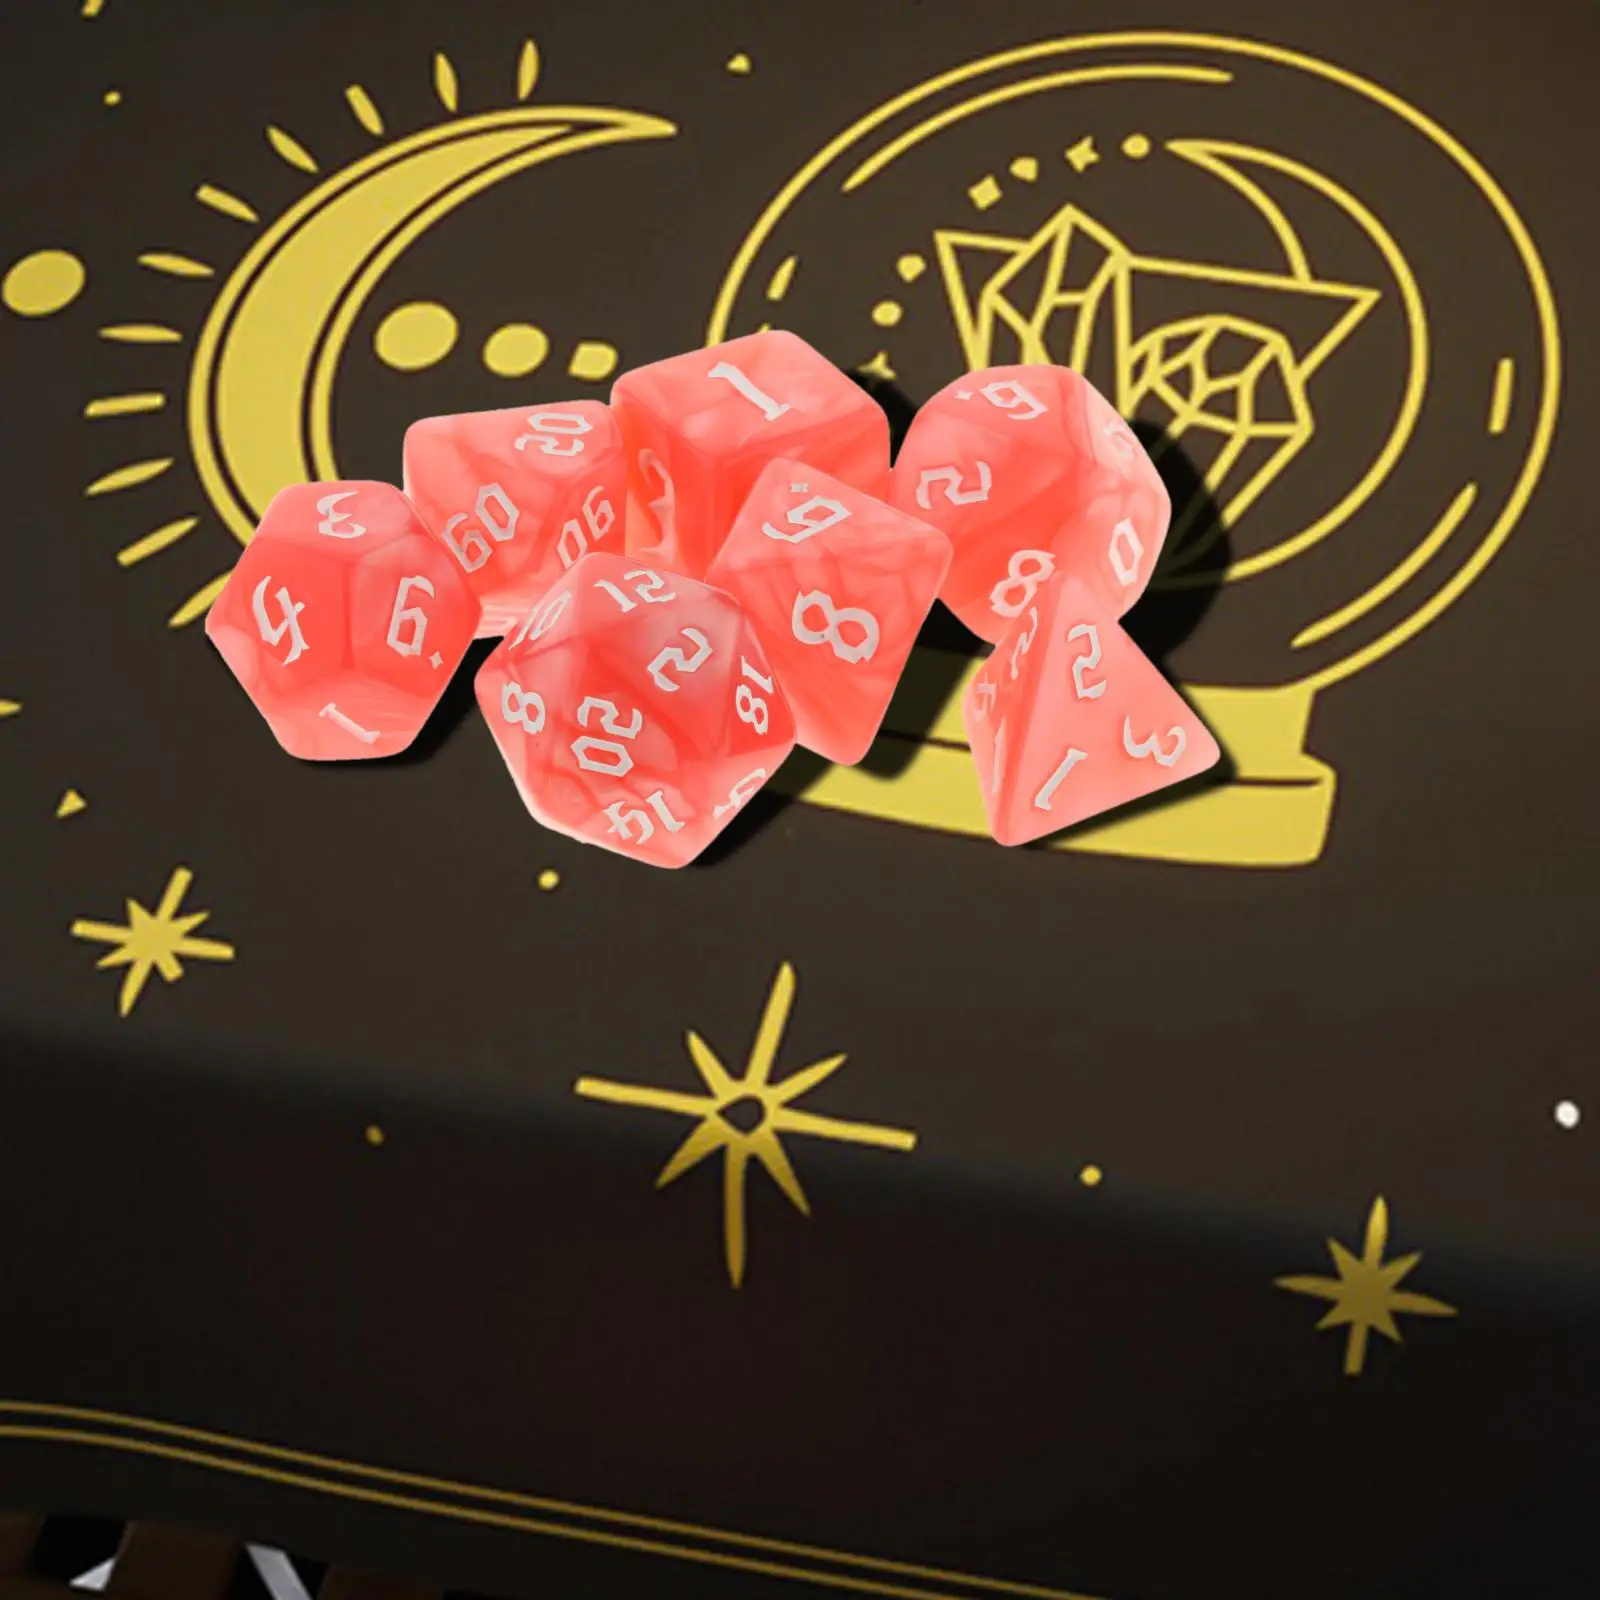 7Pcs/Set Acrylic Polyhedral Numbers Dices, Different Digital Engraved Multi-faceted Toys, Cute Funny Portable Table Game Gifts